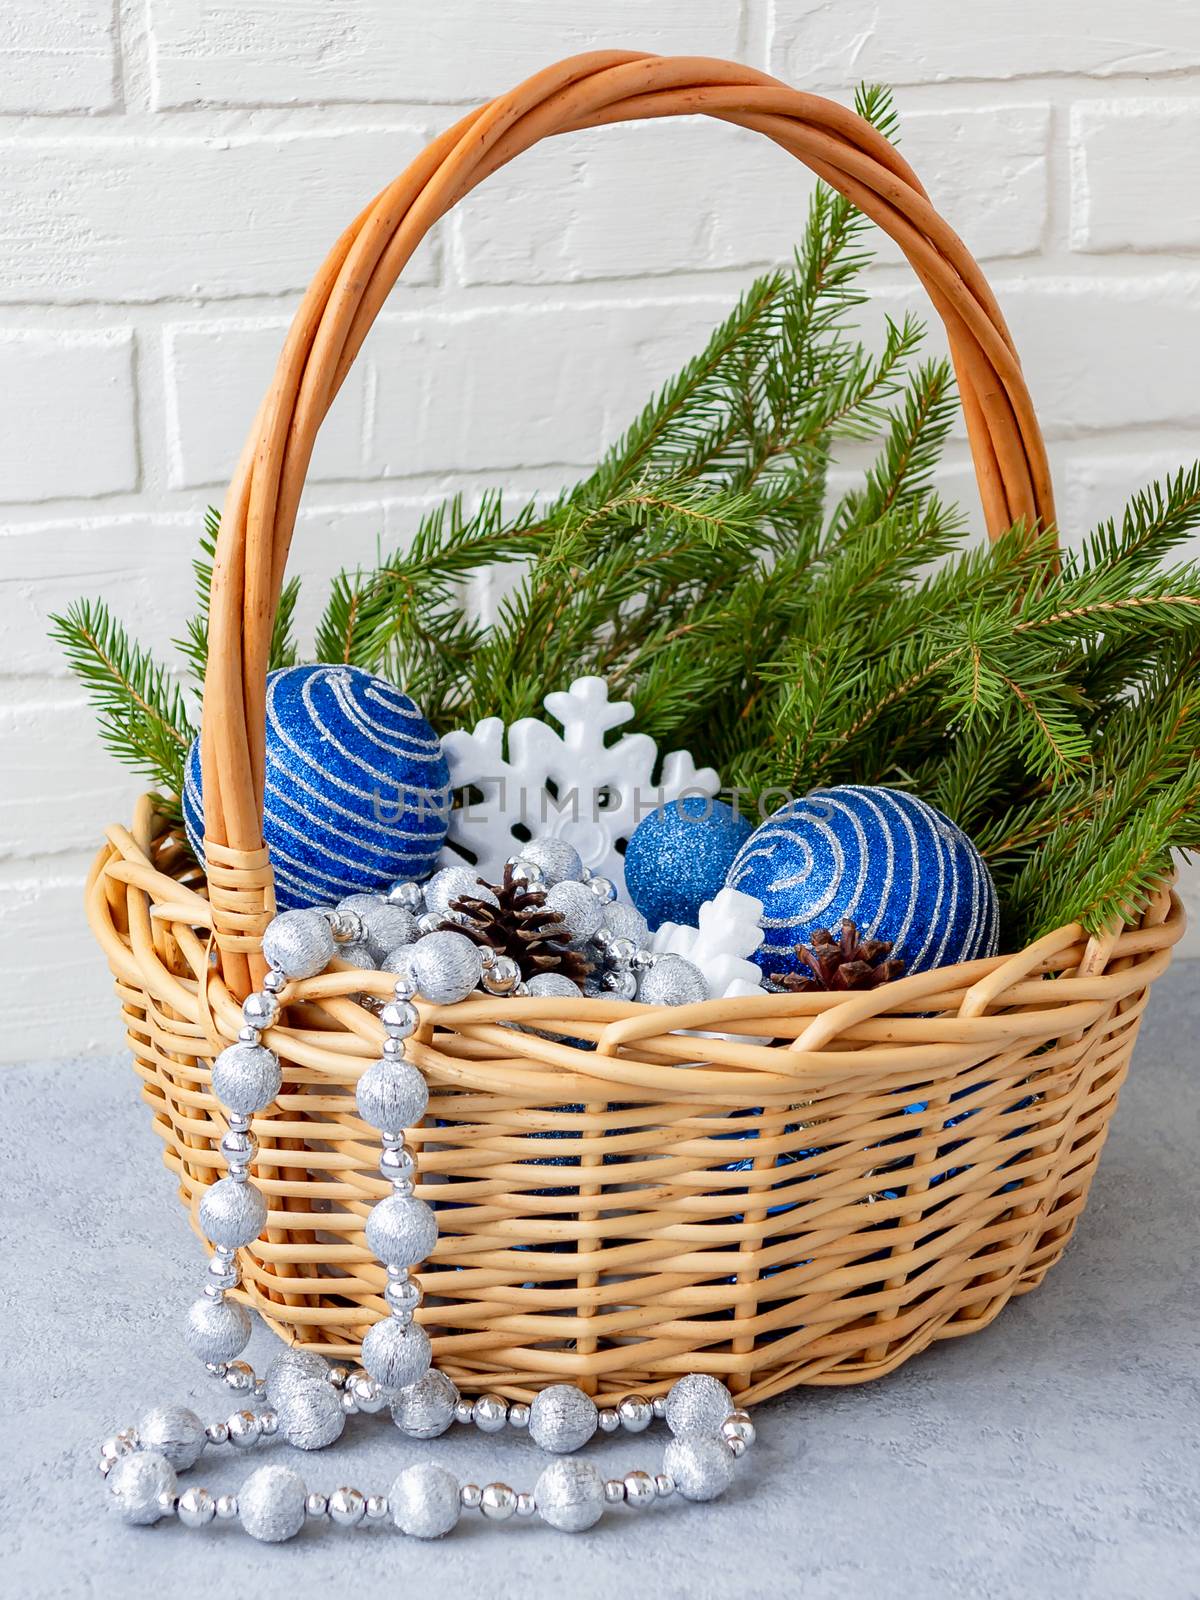 Christmas composition - wicker basket with decorations and fir branches on a light background by galsand